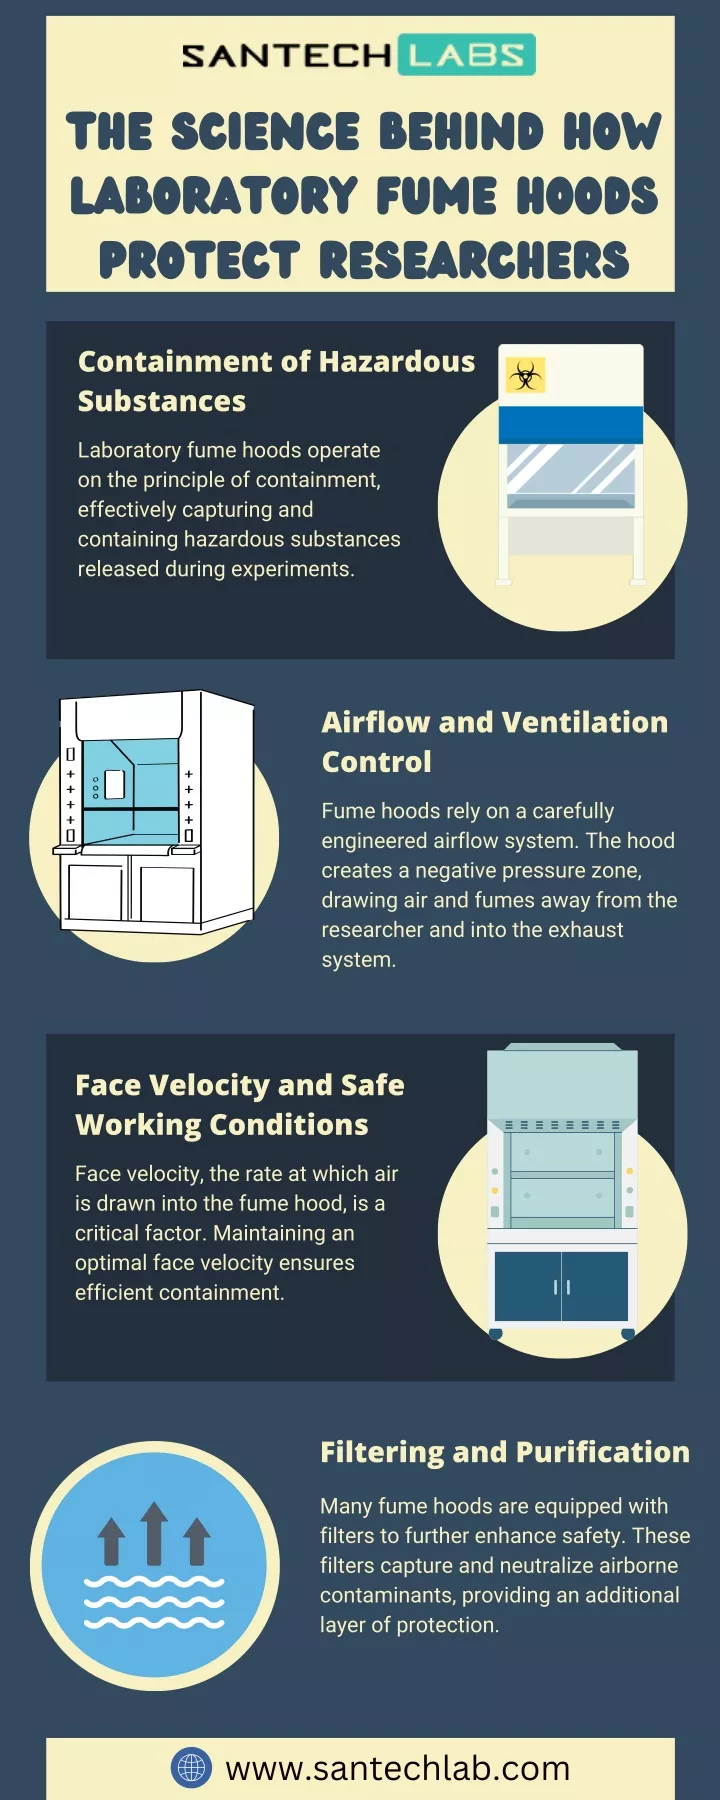 the science behind how laboratory fume hoods